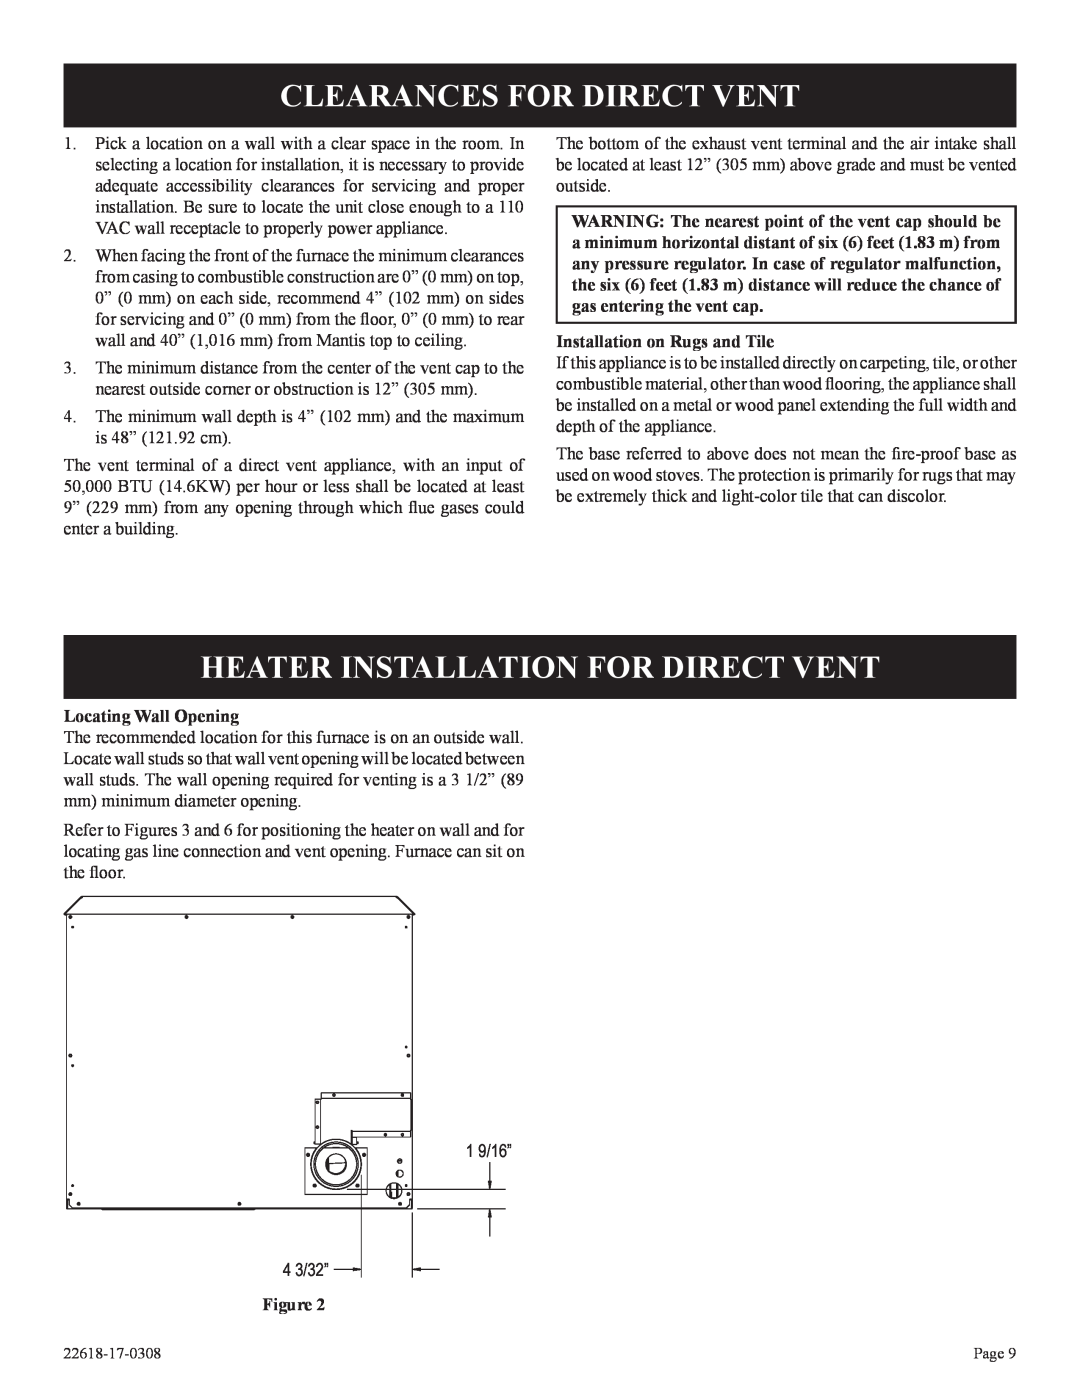 Empire Comfort Systems GP)-1, GN, BP)-1, CP Clearances For Direct Vent, Heater Installation For Direct Vent, 1 9/16” 4 3/32” 